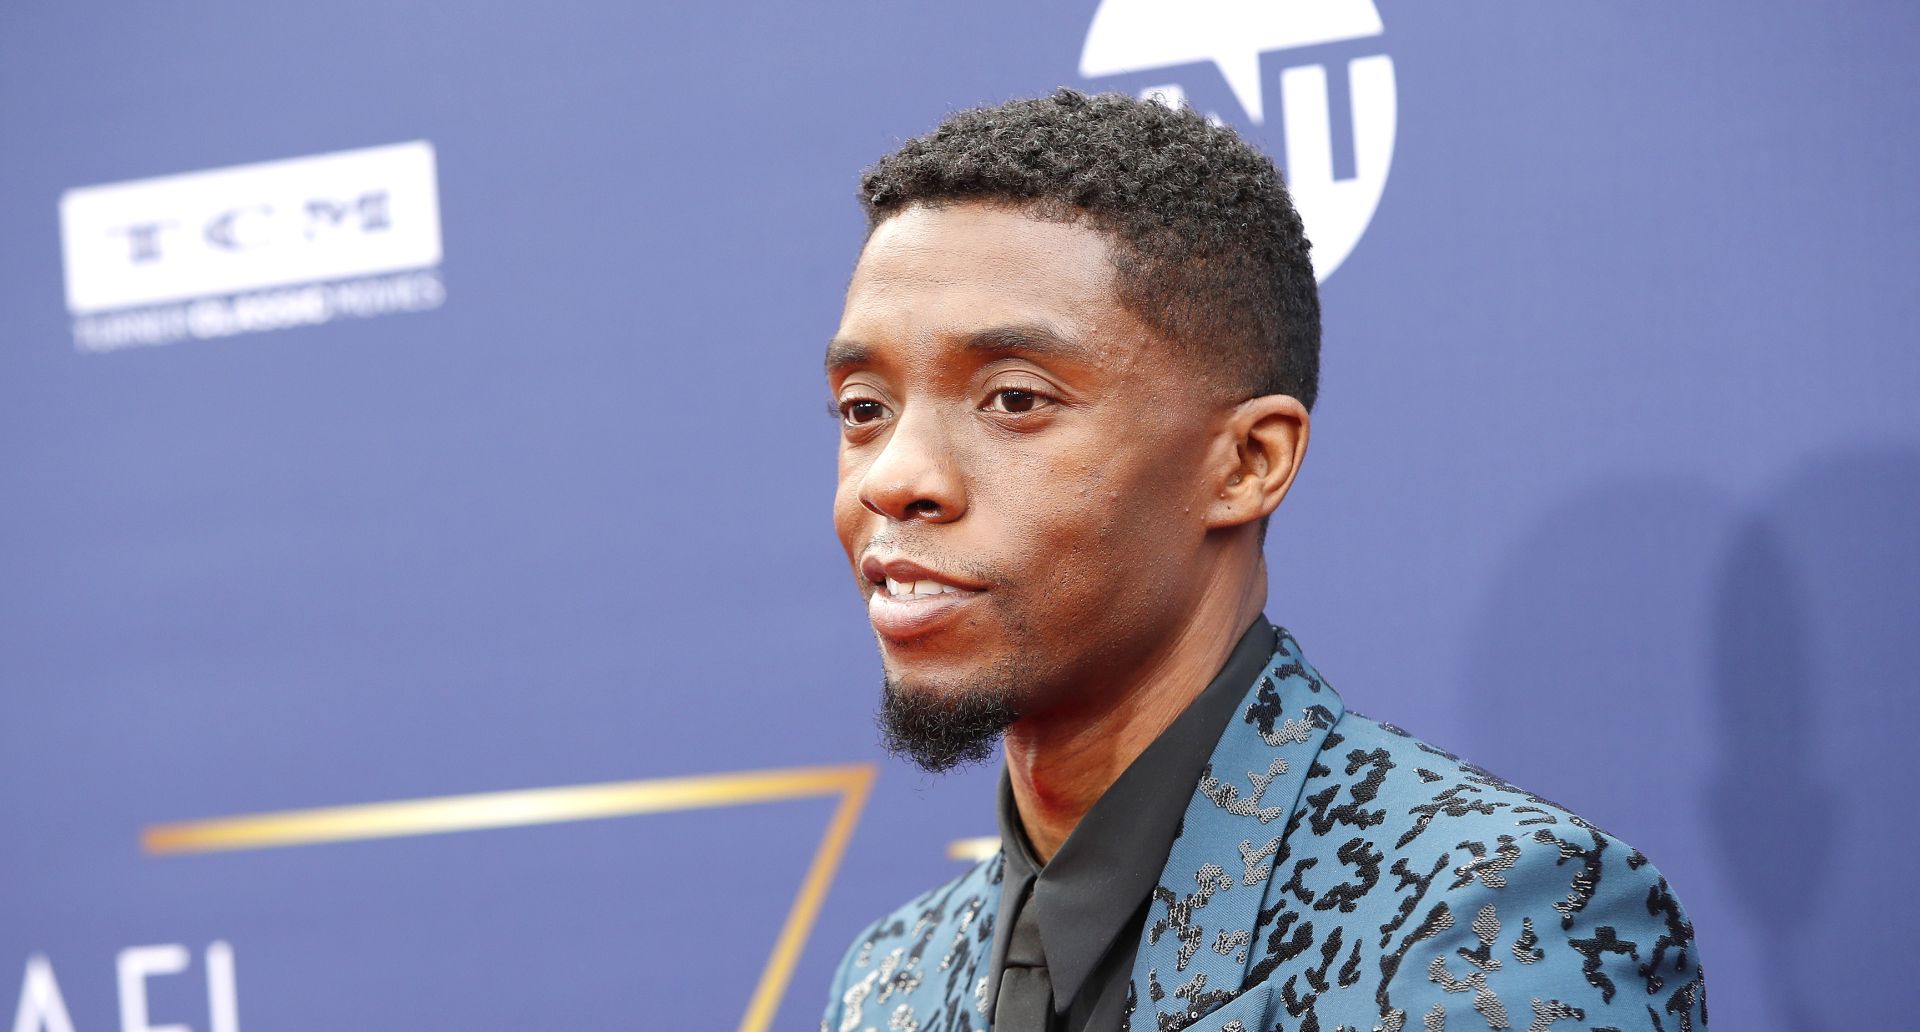 epa08633084 (FILE) - US actor Chadwick Boseman arrives for the 47th AFI Life Achievement Award, honoring Denzel Washington, at the Dolby Theatre in Hollywood, Los Angeles, California, USA 06 June 2019 (reissued 29 August 2020). Chadwick Boseman passed away age 43 after a four year battle with colon cancer.  EPA/NINA PROMMER